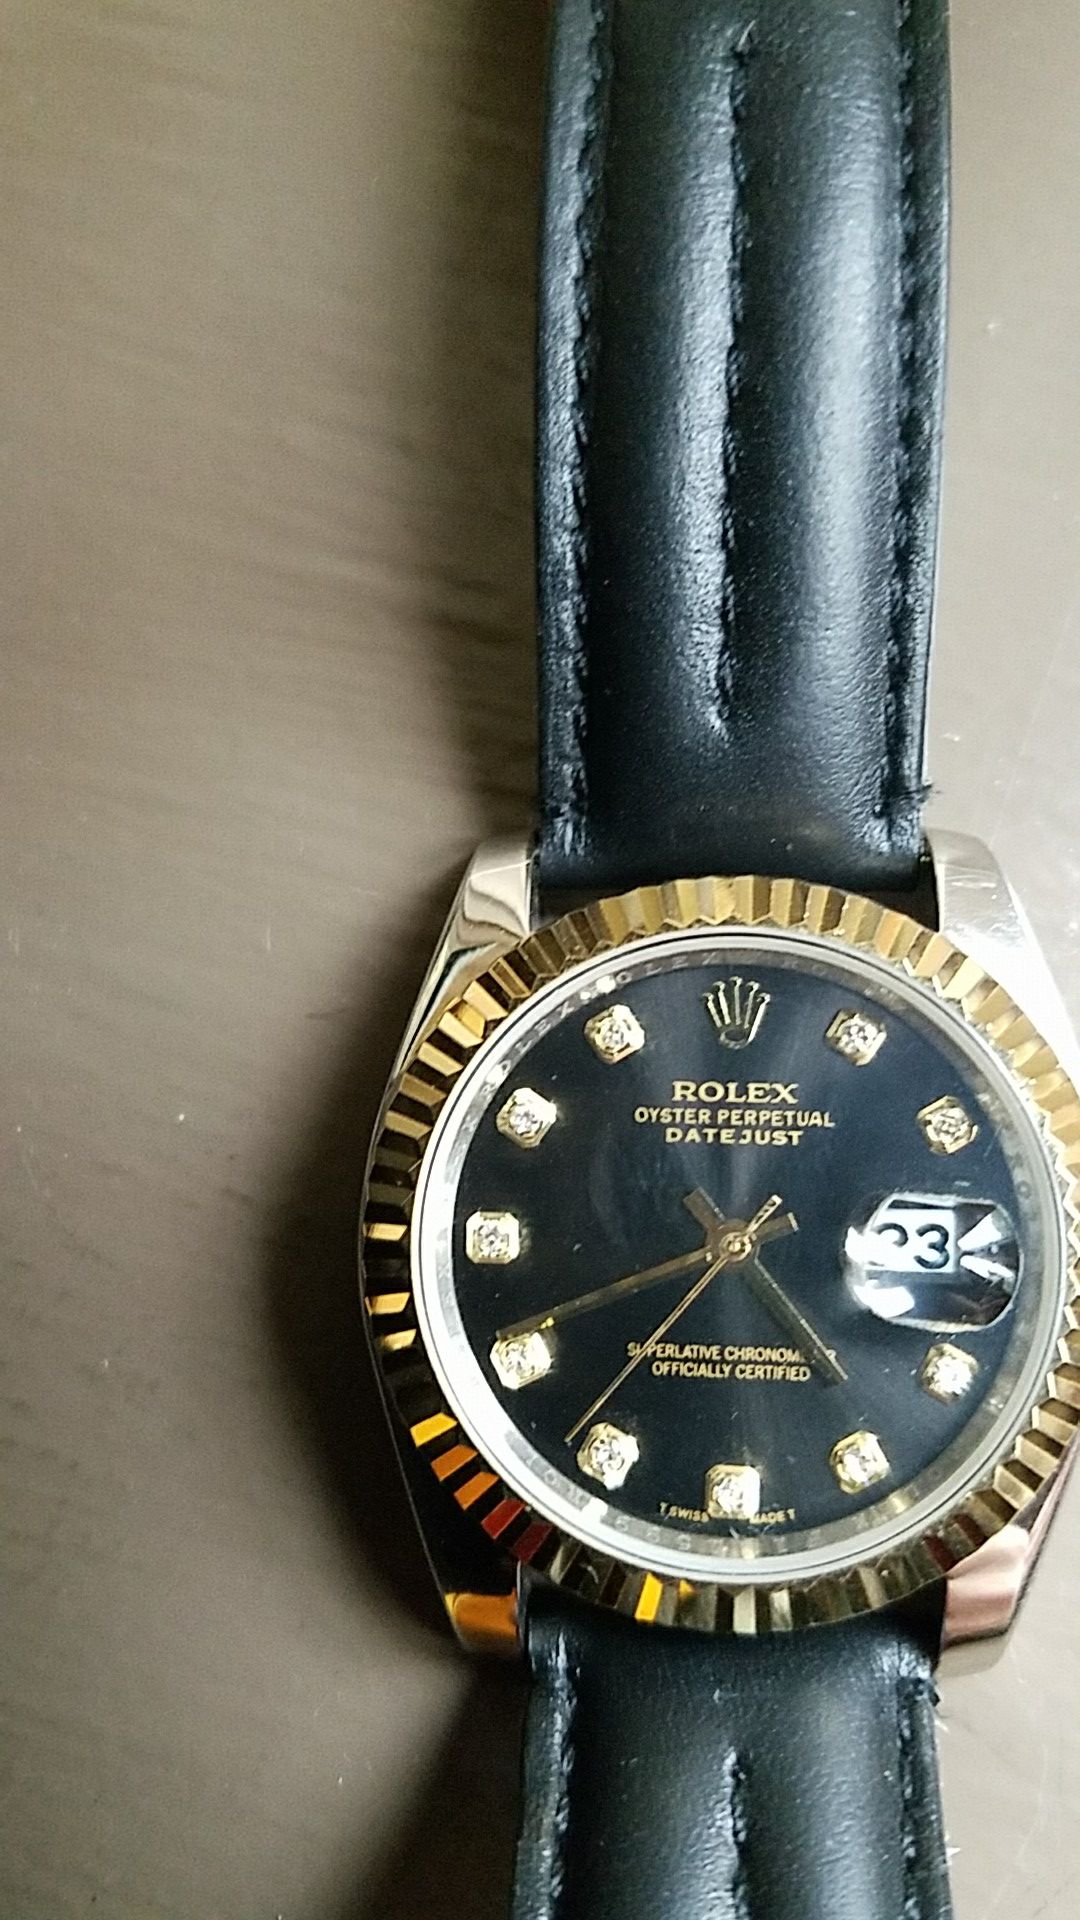 ROLEX With 72200 CL5 for Sale in Superior, -